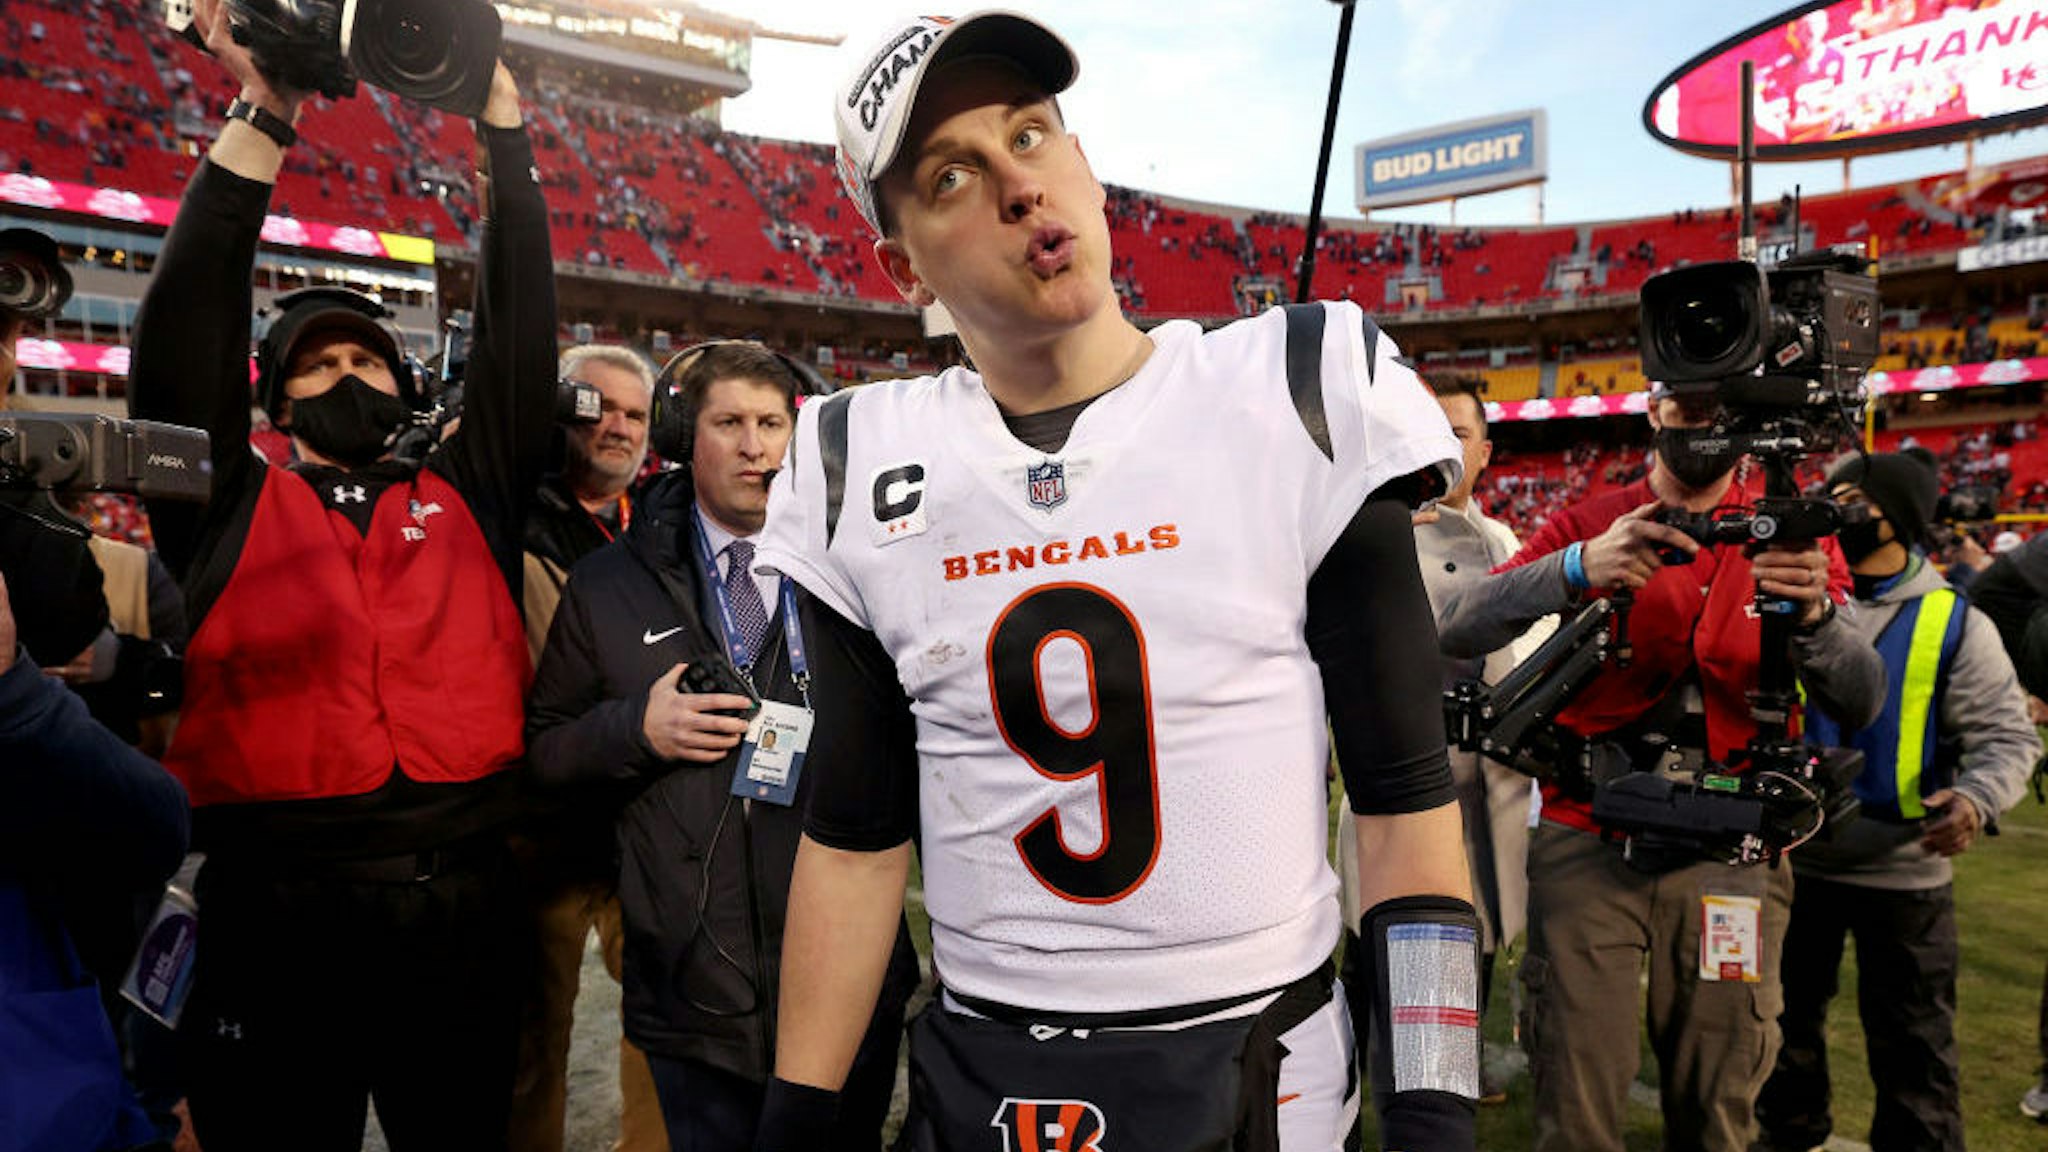 KANSAS CITY, MISSOURI - JANUARY 30: Quarterback Joe Burrow #9 of the Cincinnati Bengals reacts following the Bengals 27-24 overtime win against the Kansas City Chiefs in the AFC Championship Game at Arrowhead Stadium on January 30, 2022 in Kansas City, Missouri. (Photo by Jamie Squire/Getty Images)